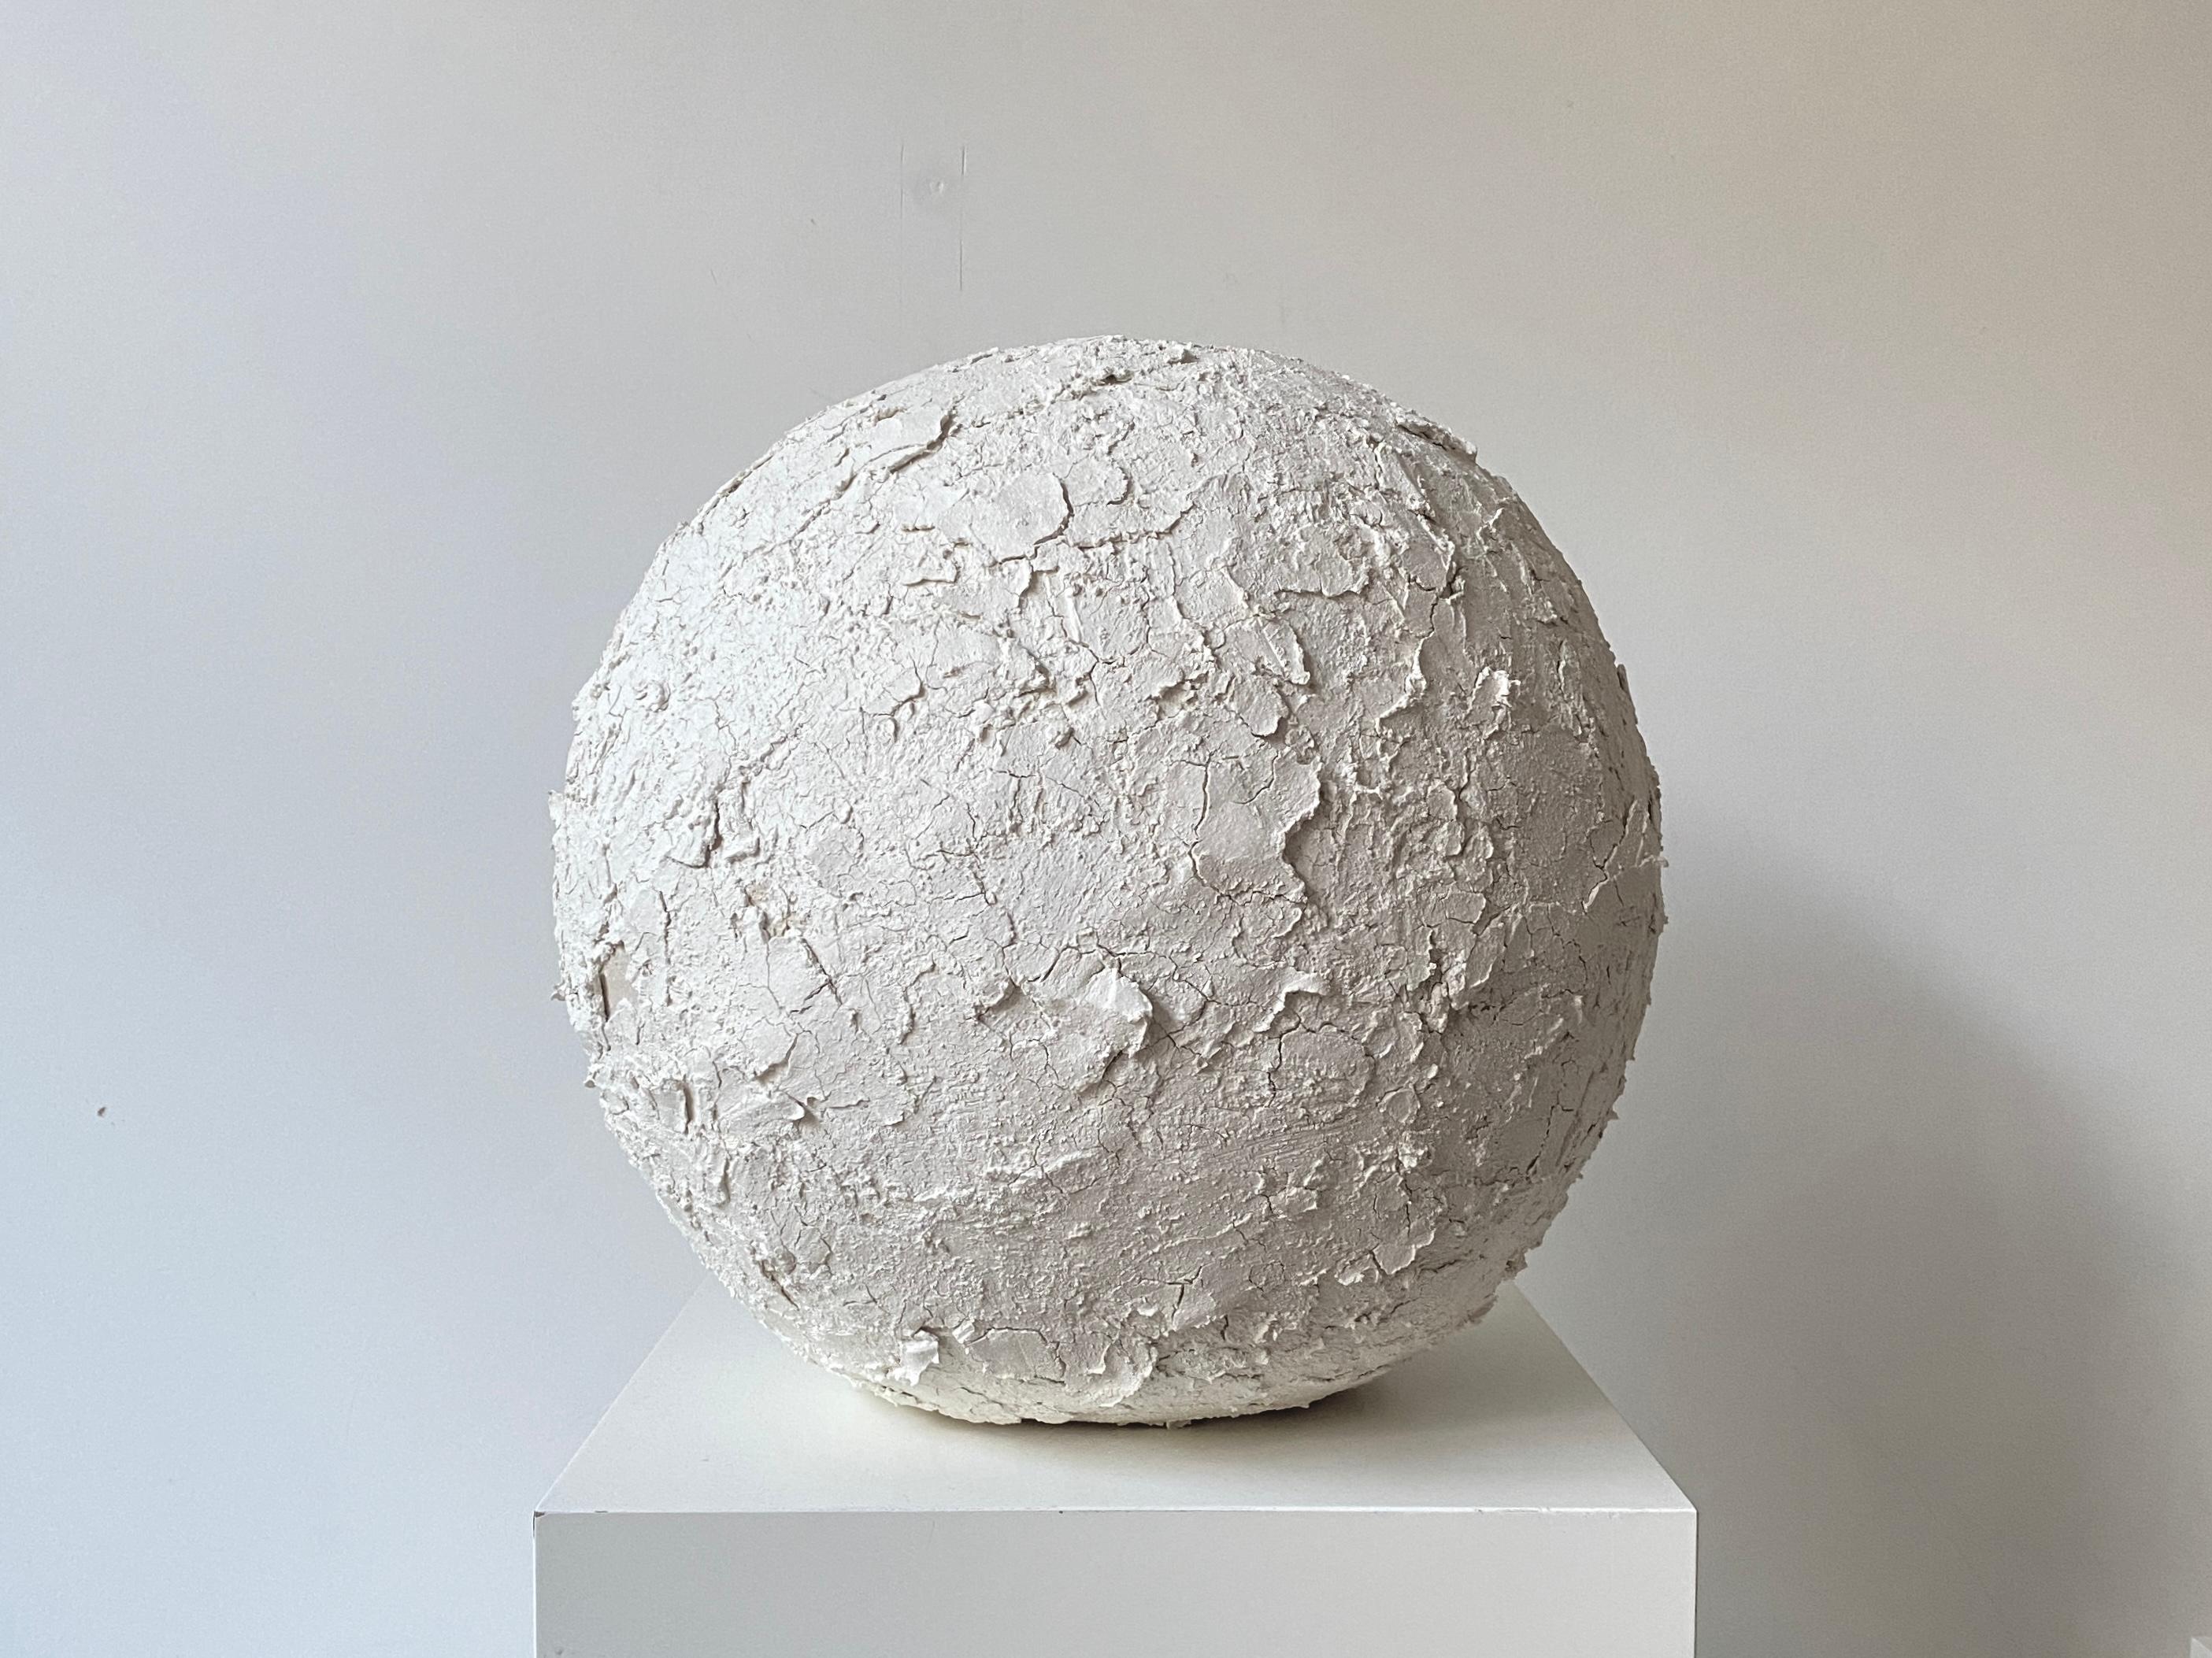 White Crust Sphere by Laura Pasquino
One of a kind
Dimensions: Ø 35 x H 35 cm
Materials: stoneware, porcelain
Finishing: textured porcelain

Laura Pasquino
Incorporating references from ancient Korean ceramics as well as principles of